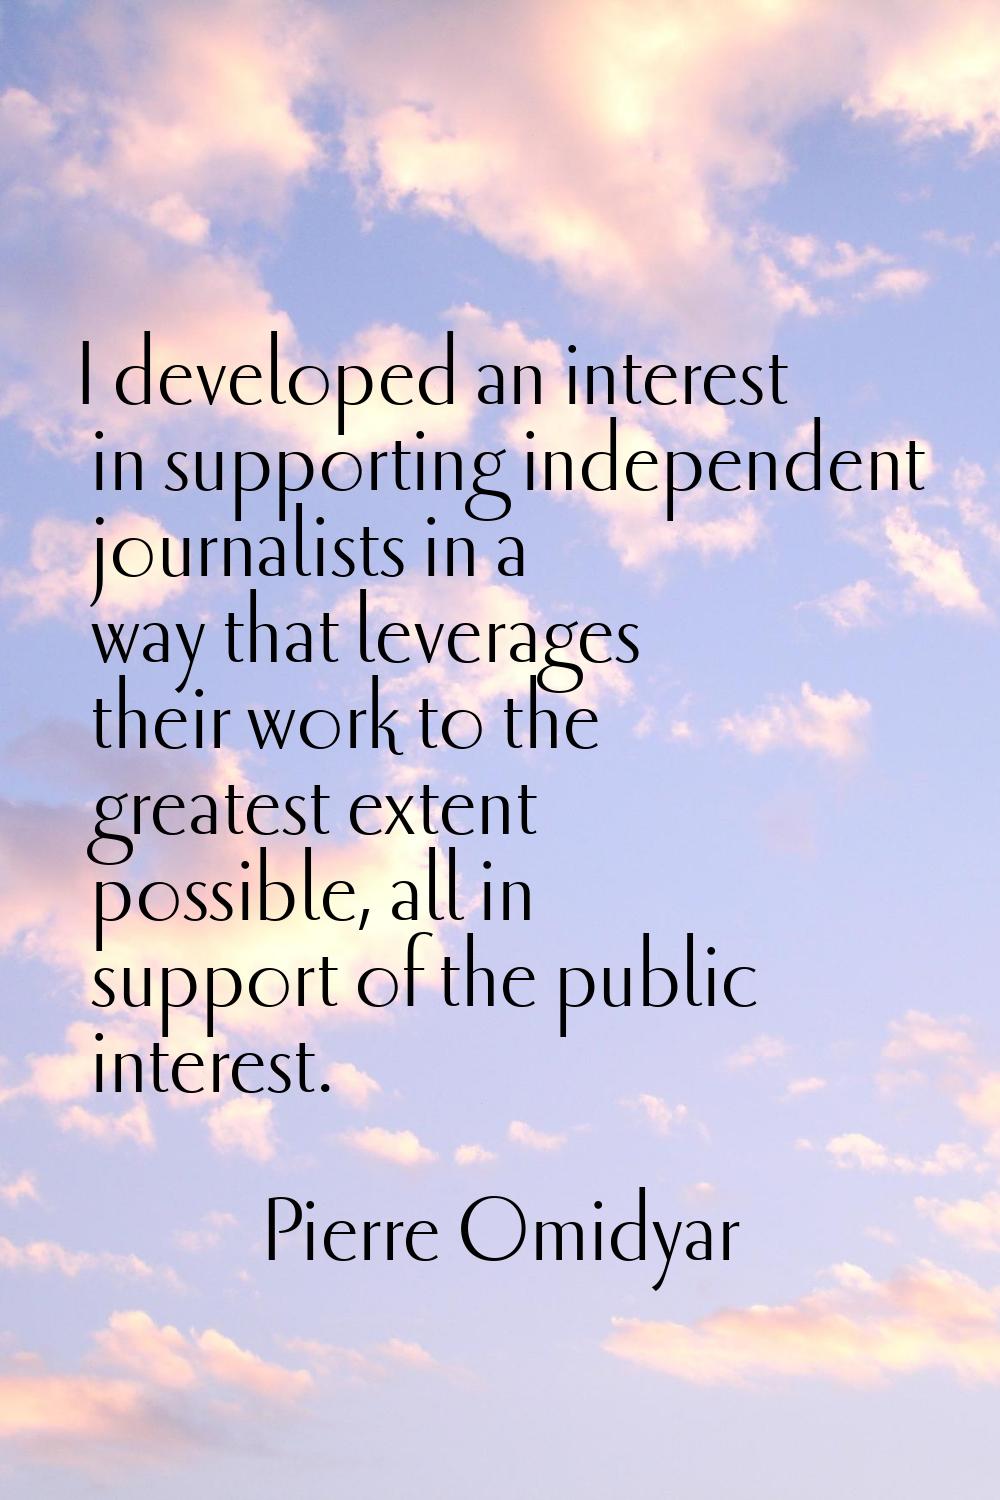 I developed an interest in supporting independent journalists in a way that leverages their work to